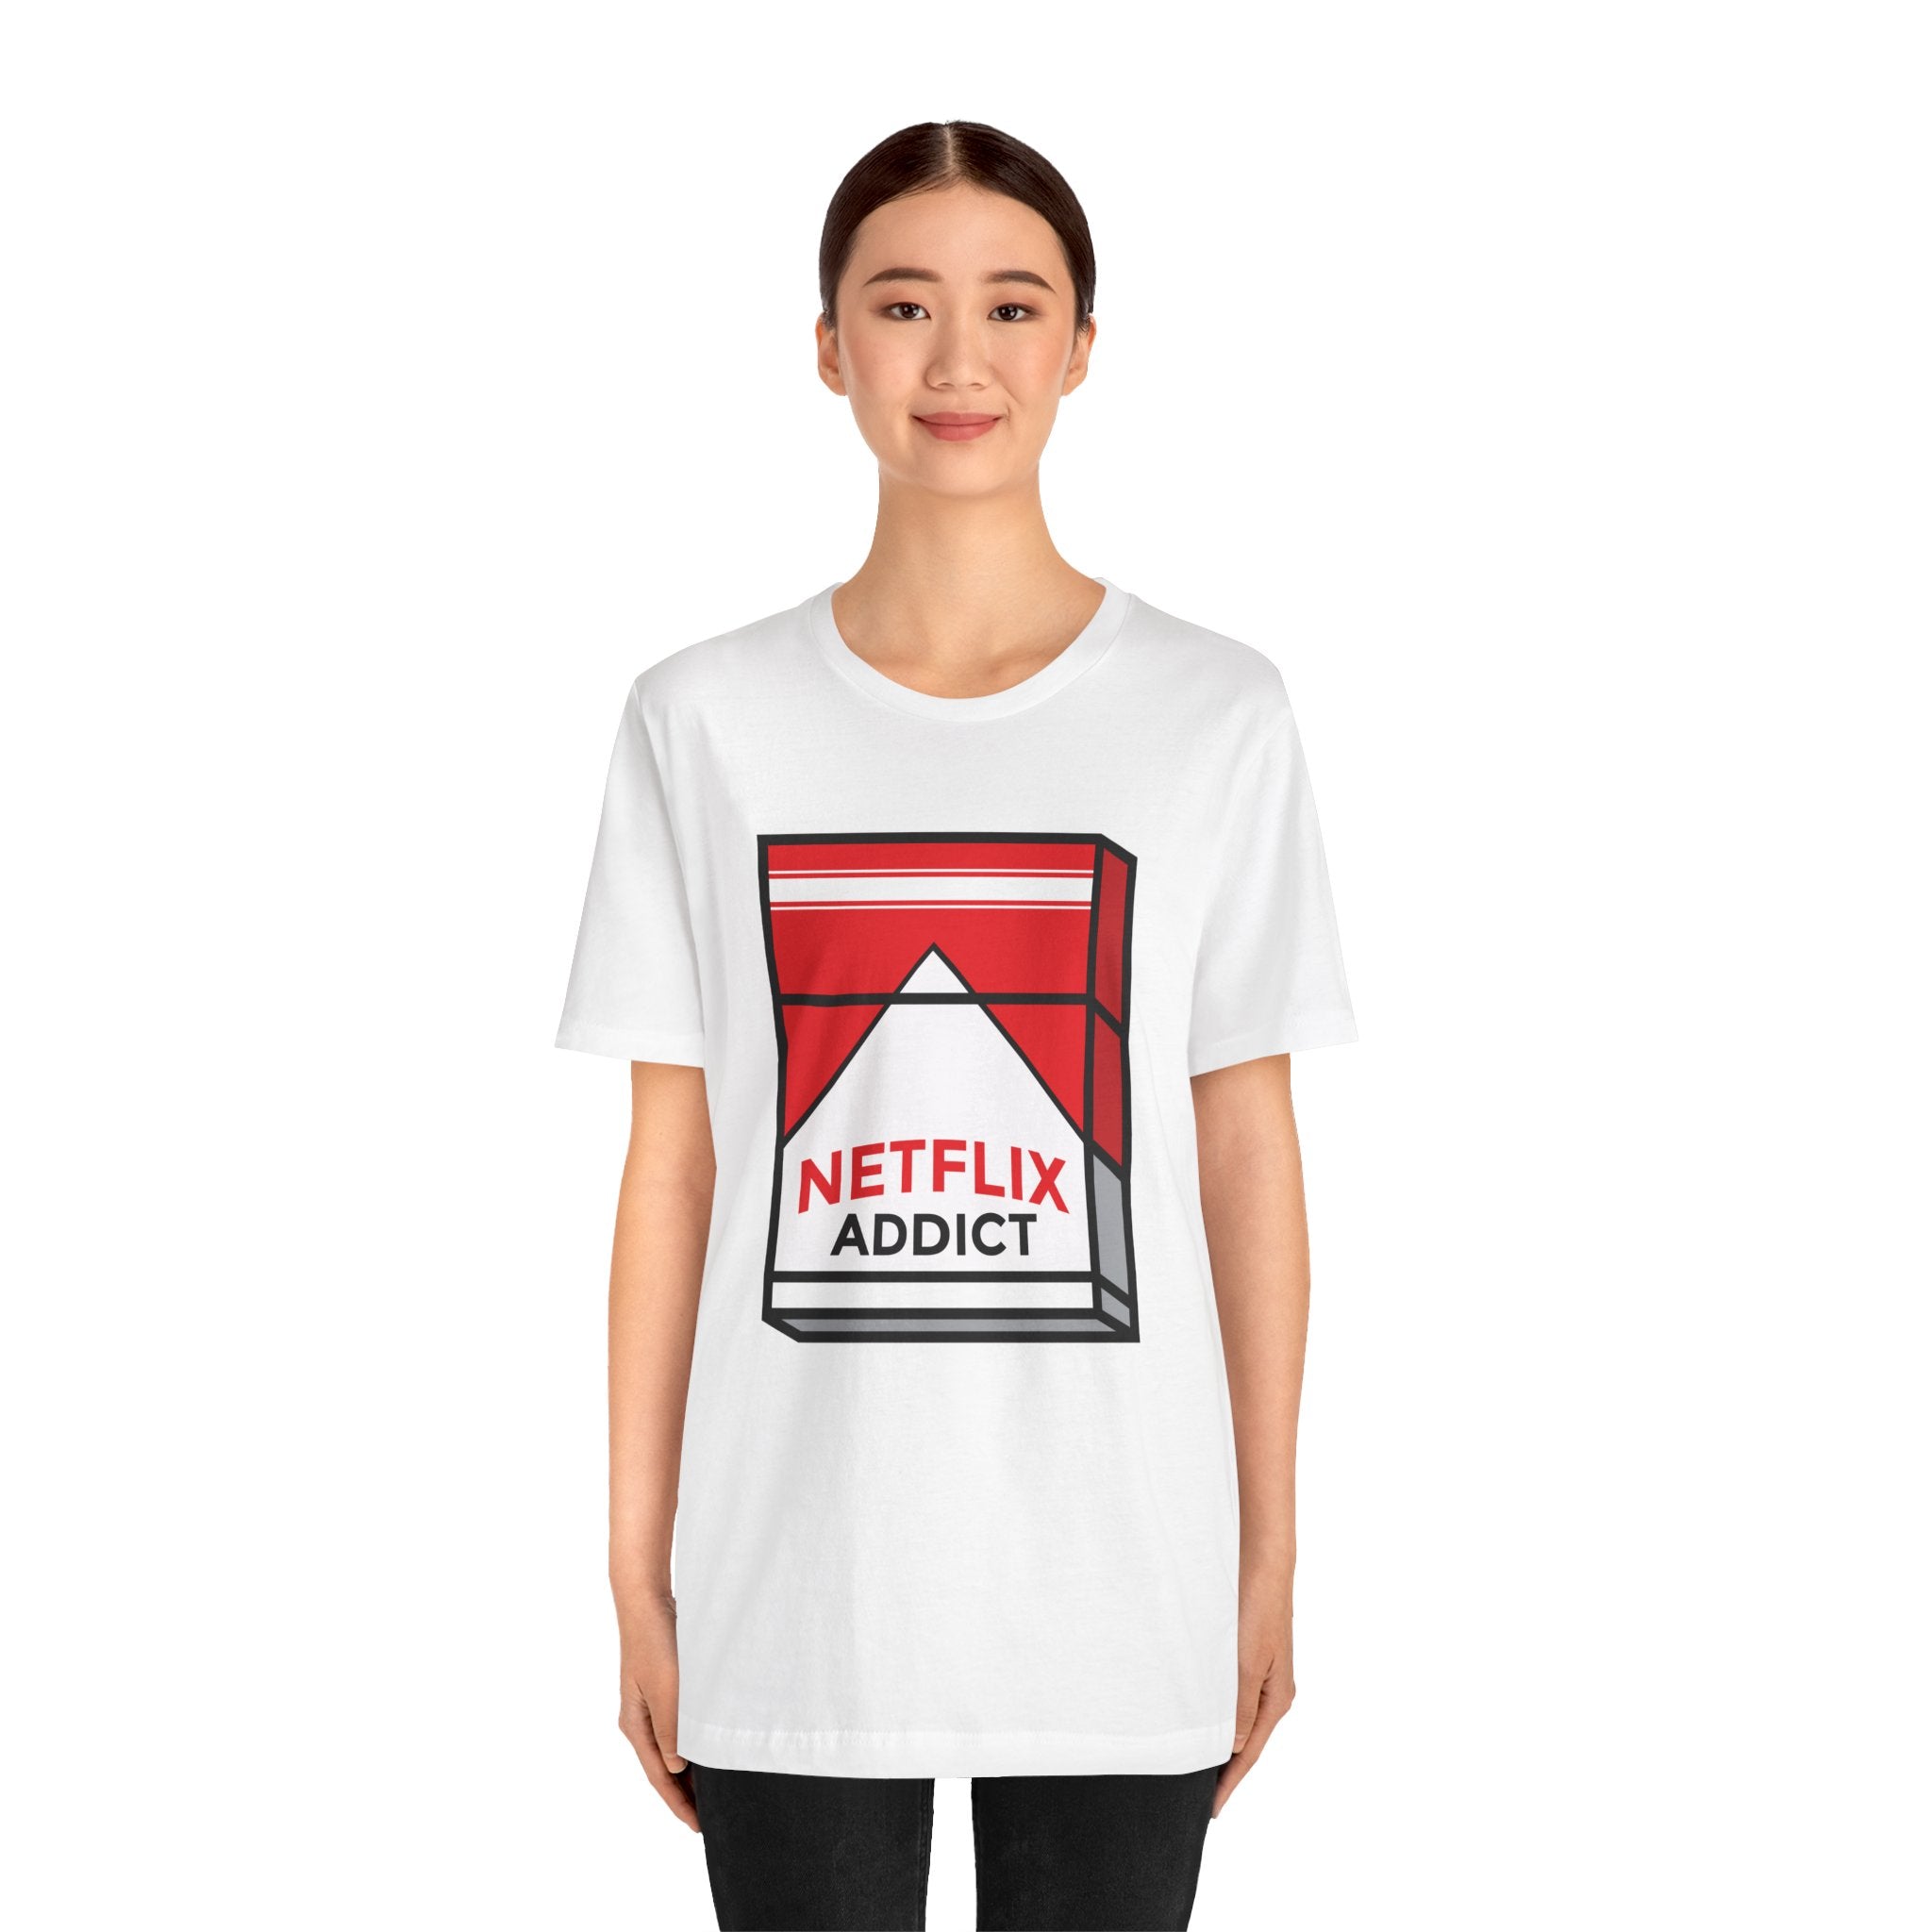 A young woman wearing a Netflix Addict unisex jersey tee with a red and black triangle design.